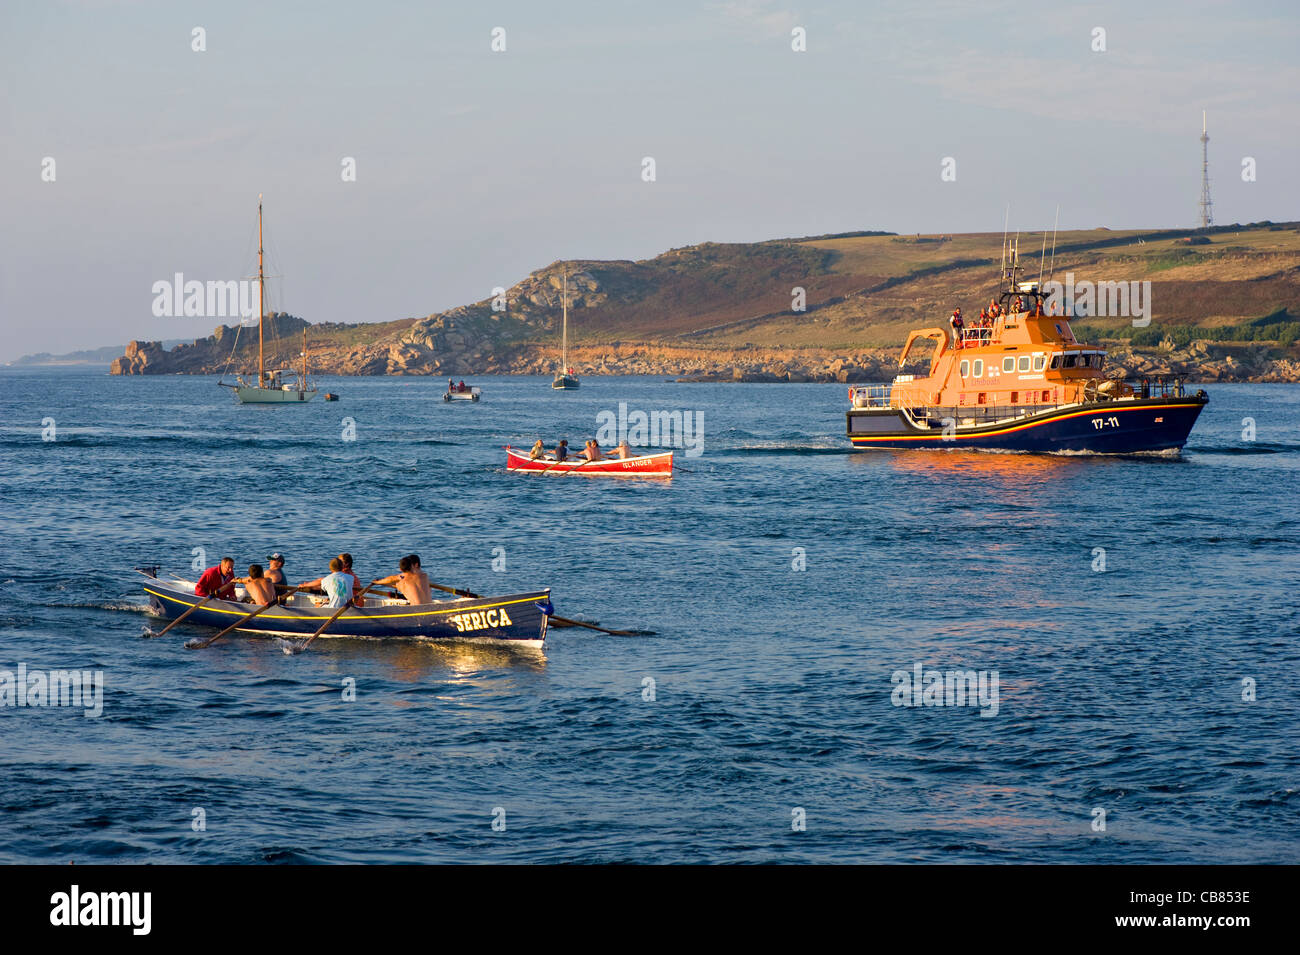 Gig Racing on the Isles of Scilly, Uk with Lifeboat in the distance. Stock Photo